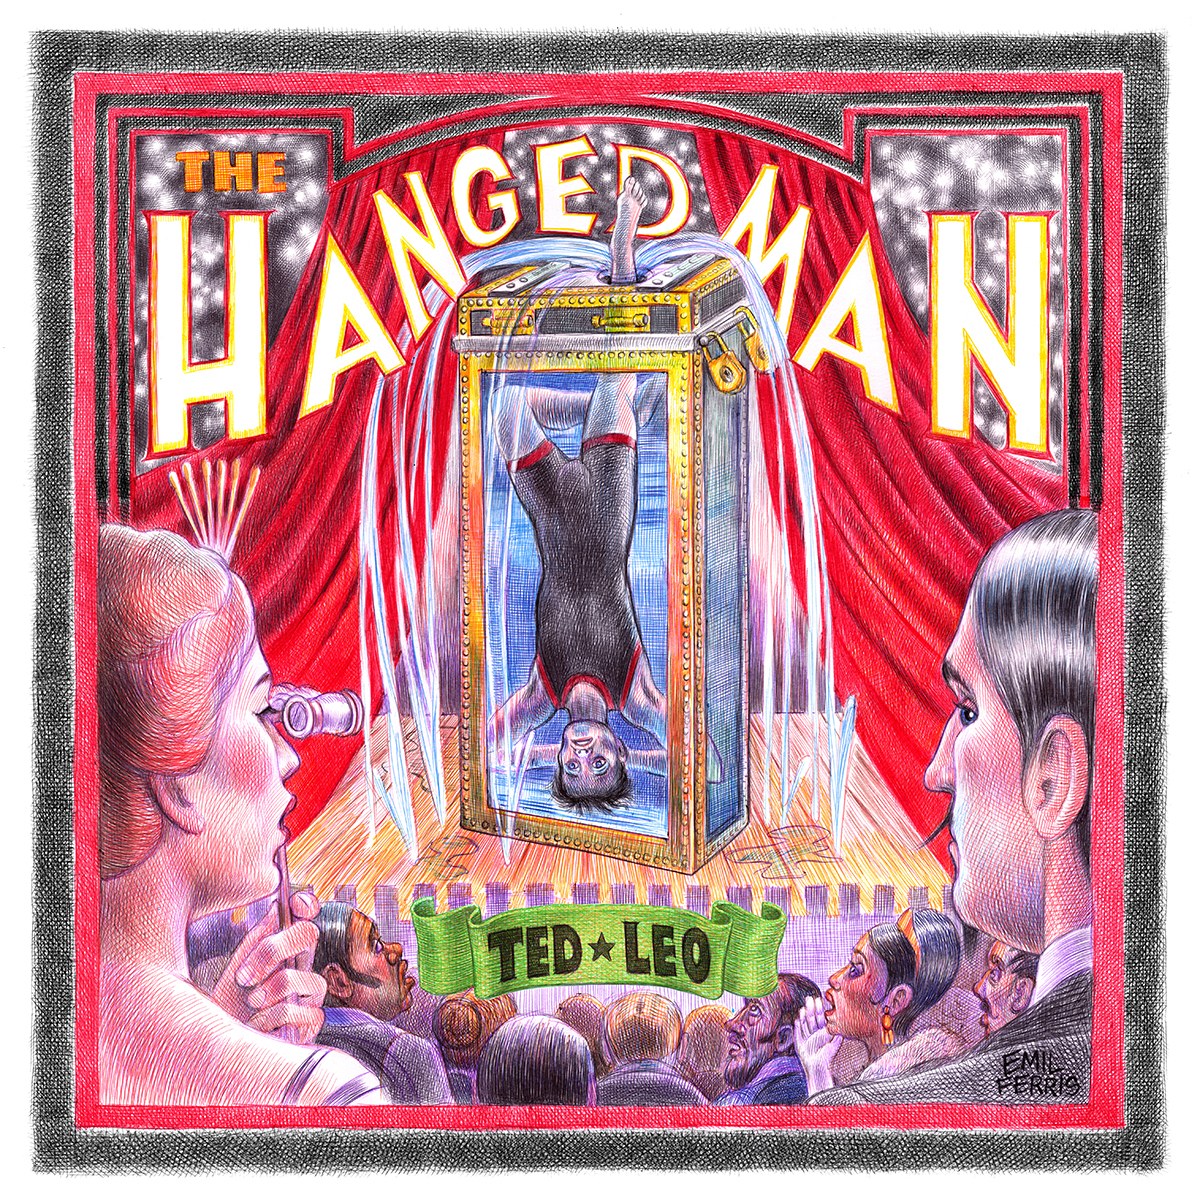 Ted Leo Details New Album <i>The Hanged Man</i>, Releases First Single “You’re Like Me”” title=”ted3d_smaller_2-1499355856″ data-original-id=”248119″ data-adjusted-id=”248119″ class=”sm_size_full_width sm_alignment_center ” data-image-source=”professional” /></p>
<p>1. Moon Out of Phase<br />
2. Used to Believe<br />
3. Can’t Go Back<br />
4. The Future<br />
5. William Weld in the 21st Century<br />
6. The Nazarene<br />
7. Run to the City<br />
8. Gray Havens<br />
9. Make Me Feel Loved<br />
10. The Little Smug Supper Club<br />
11. Anthems of None<br />
12. You’re Like Me<br />
13. Lonsdale Avenue<br />
14. Let’s Stay on the Moon</p><div class=